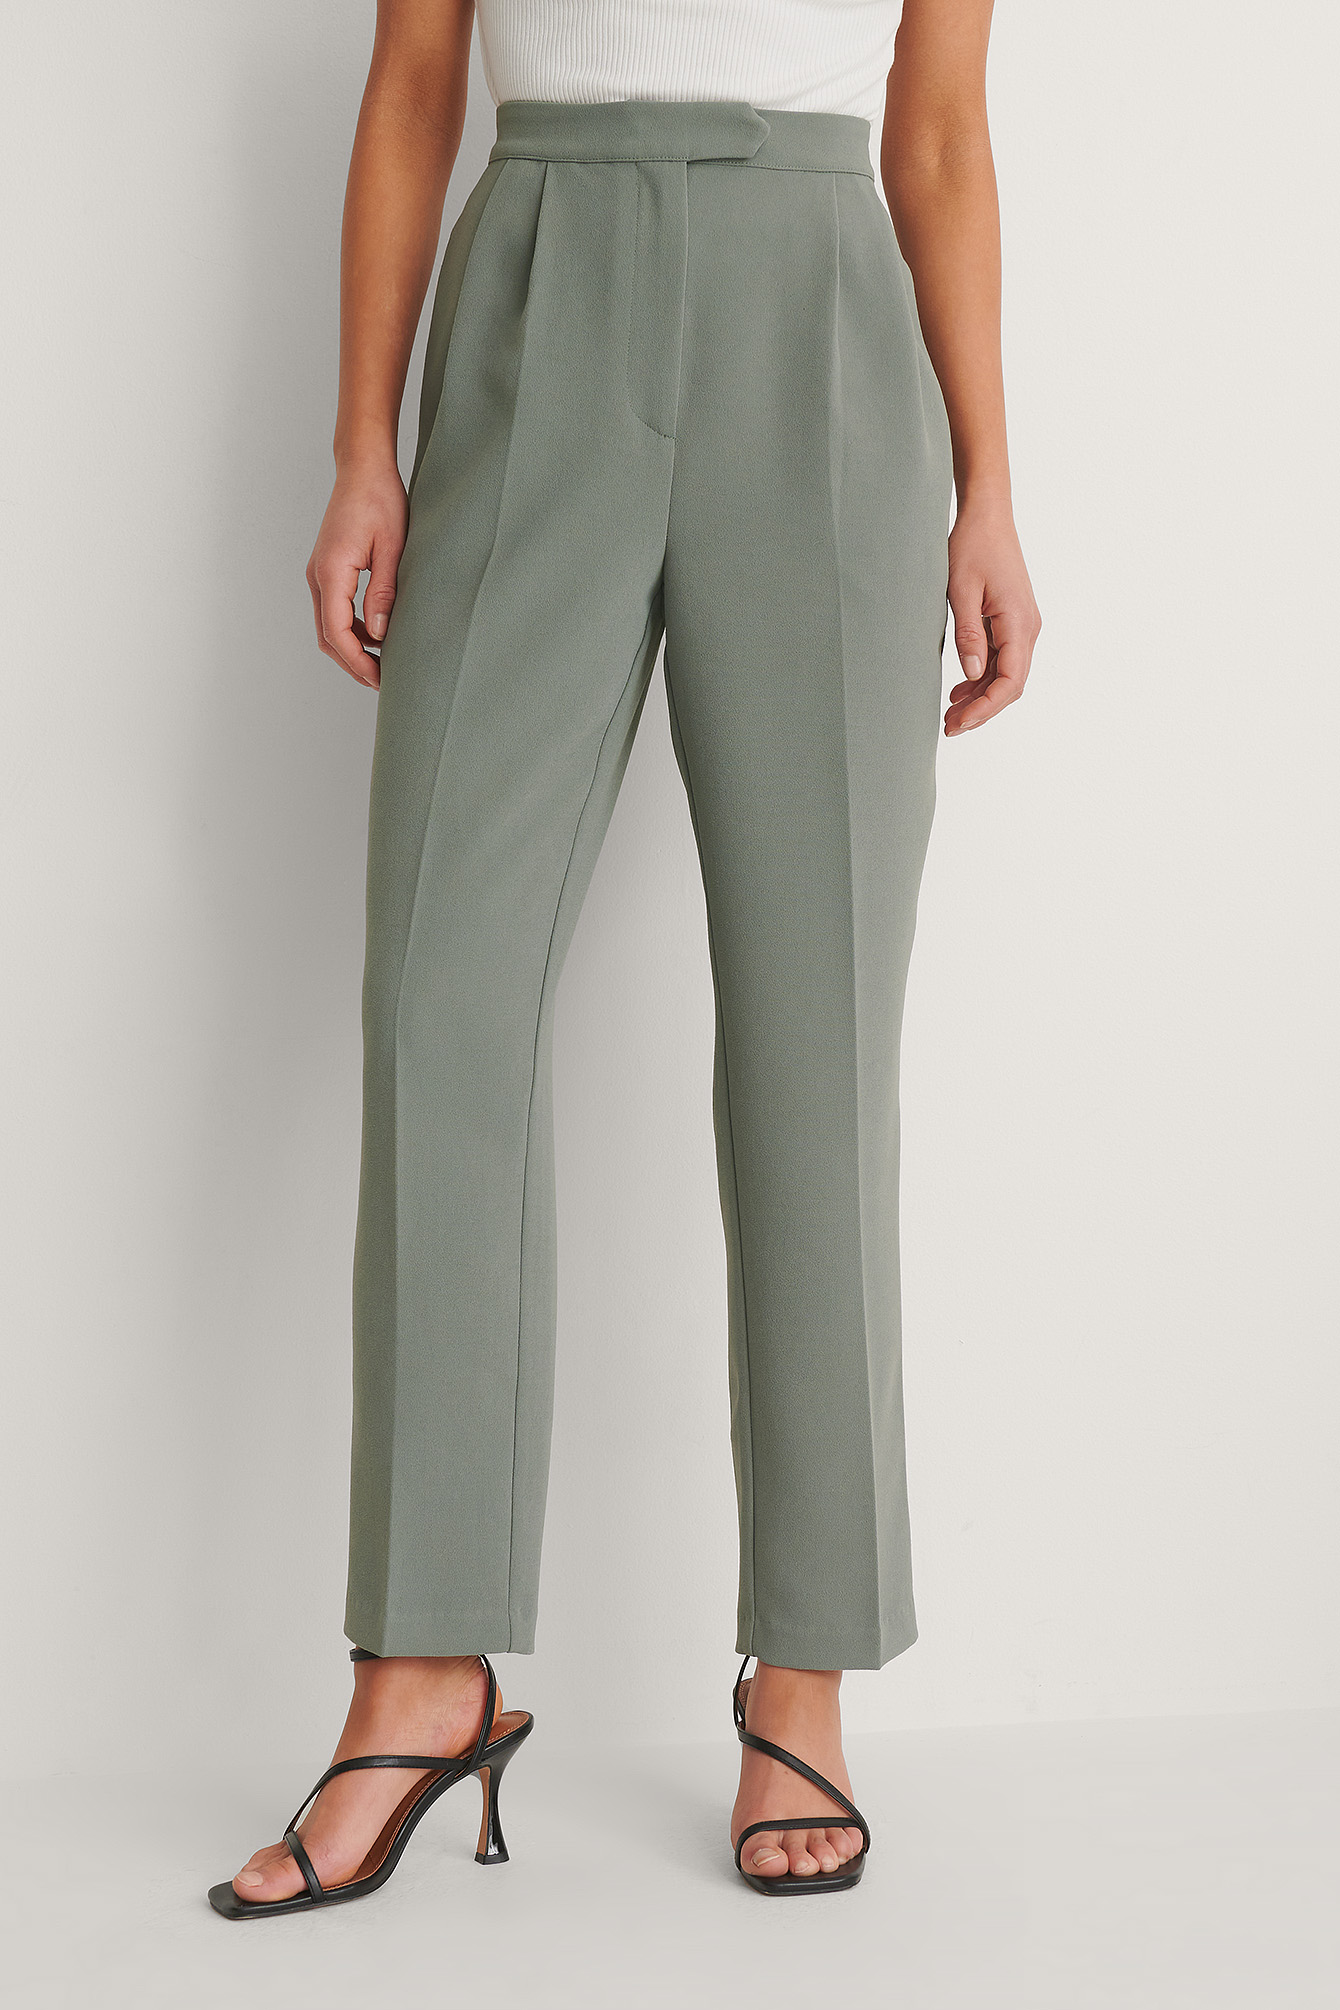 Green Cropped Darted Suit Pants